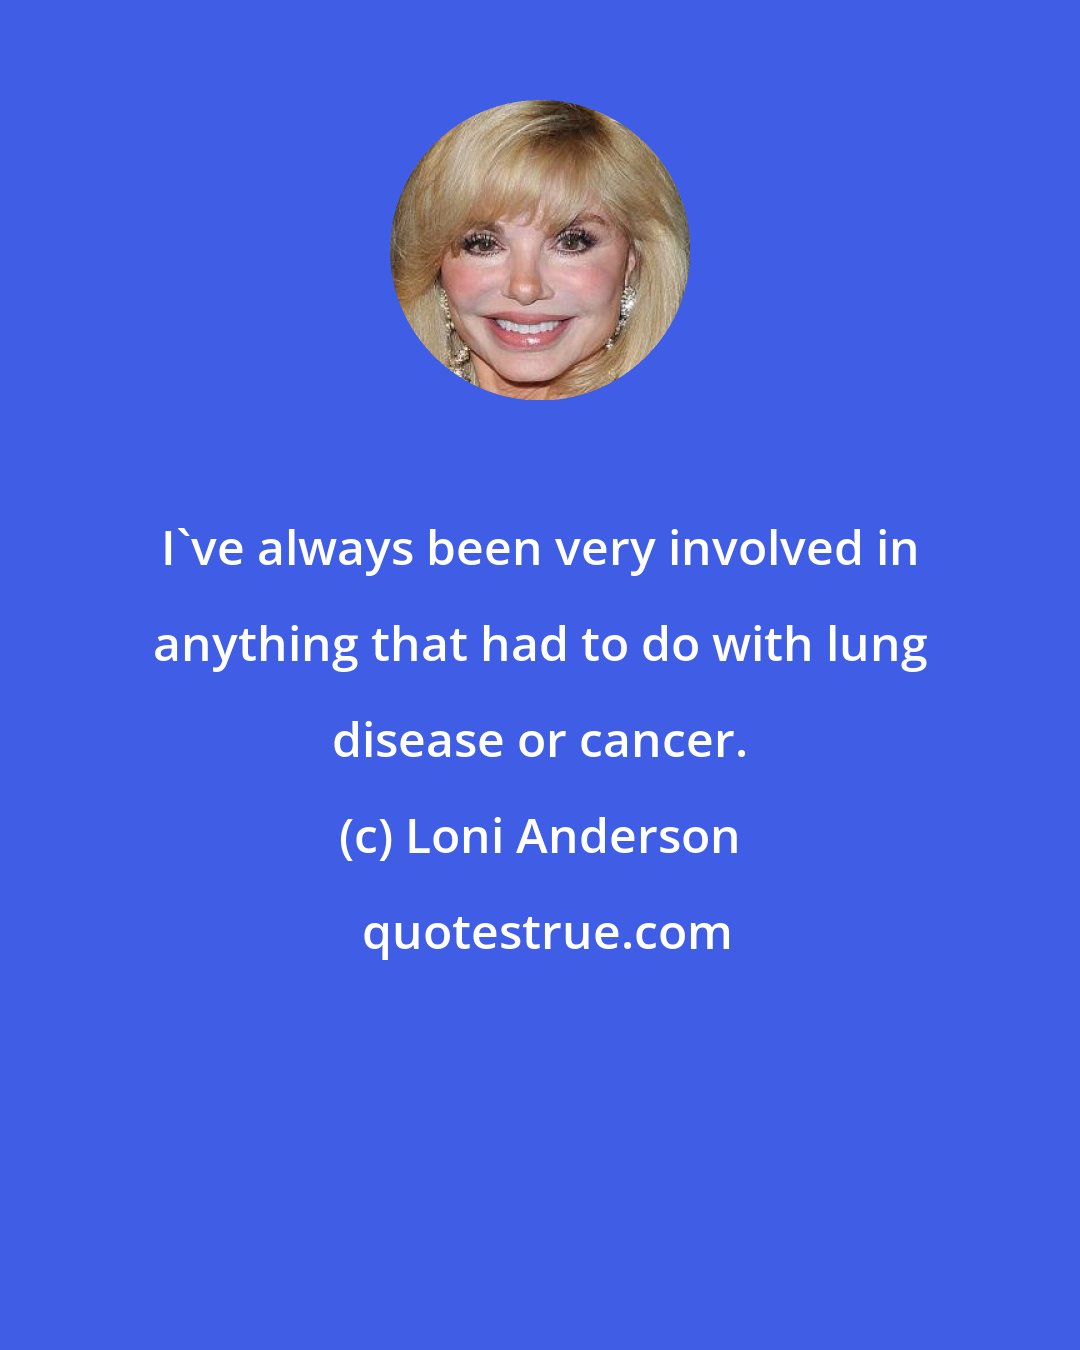 Loni Anderson: I've always been very involved in anything that had to do with lung disease or cancer.